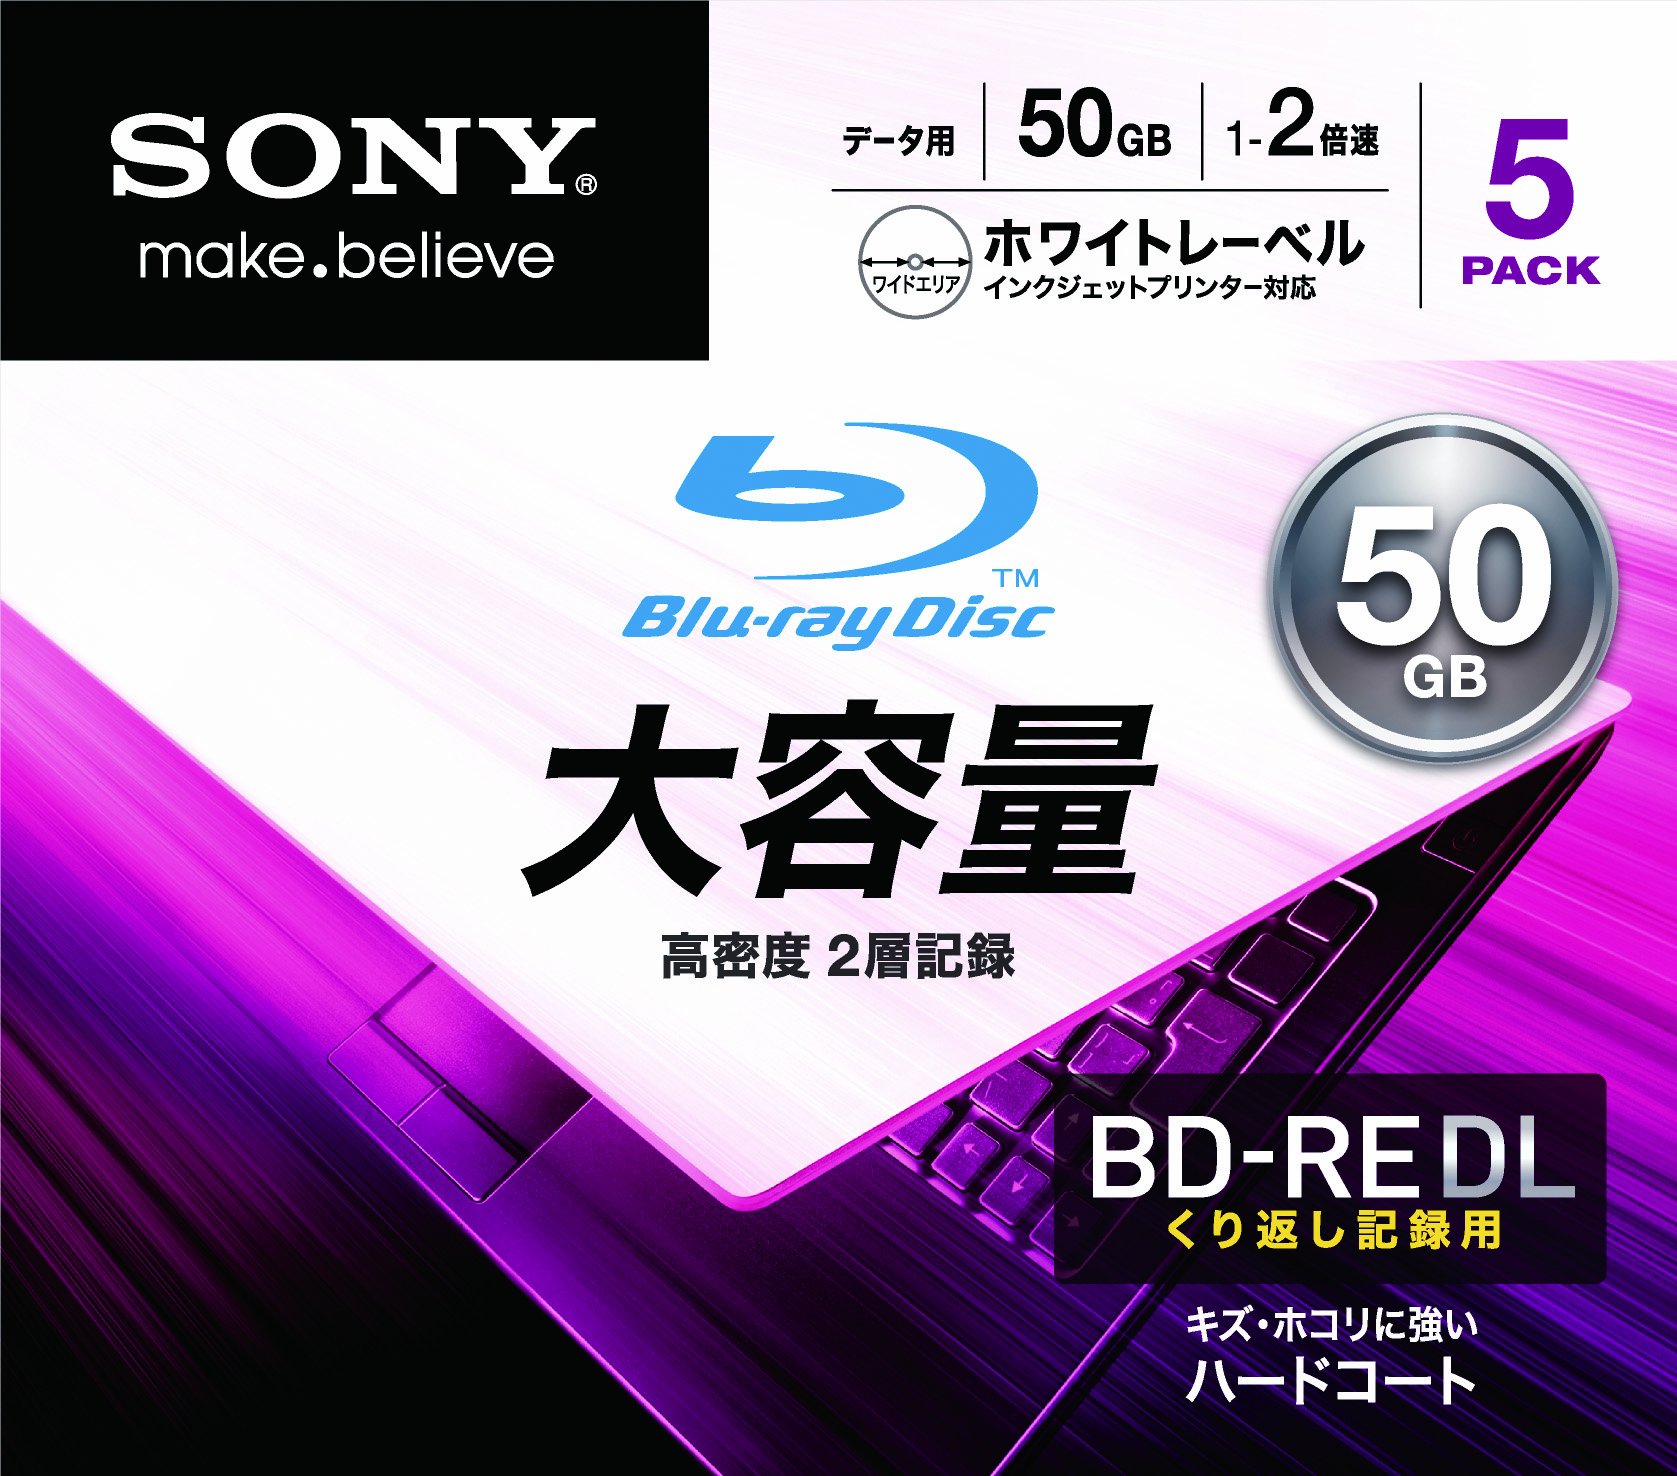 Sony Blu-ray Rewritable Disc for PC Data | BD-RE 50GB DL 2x Ink-jet Printable 5 Pack | 5BNE2DCPS2 (Japanese Import)